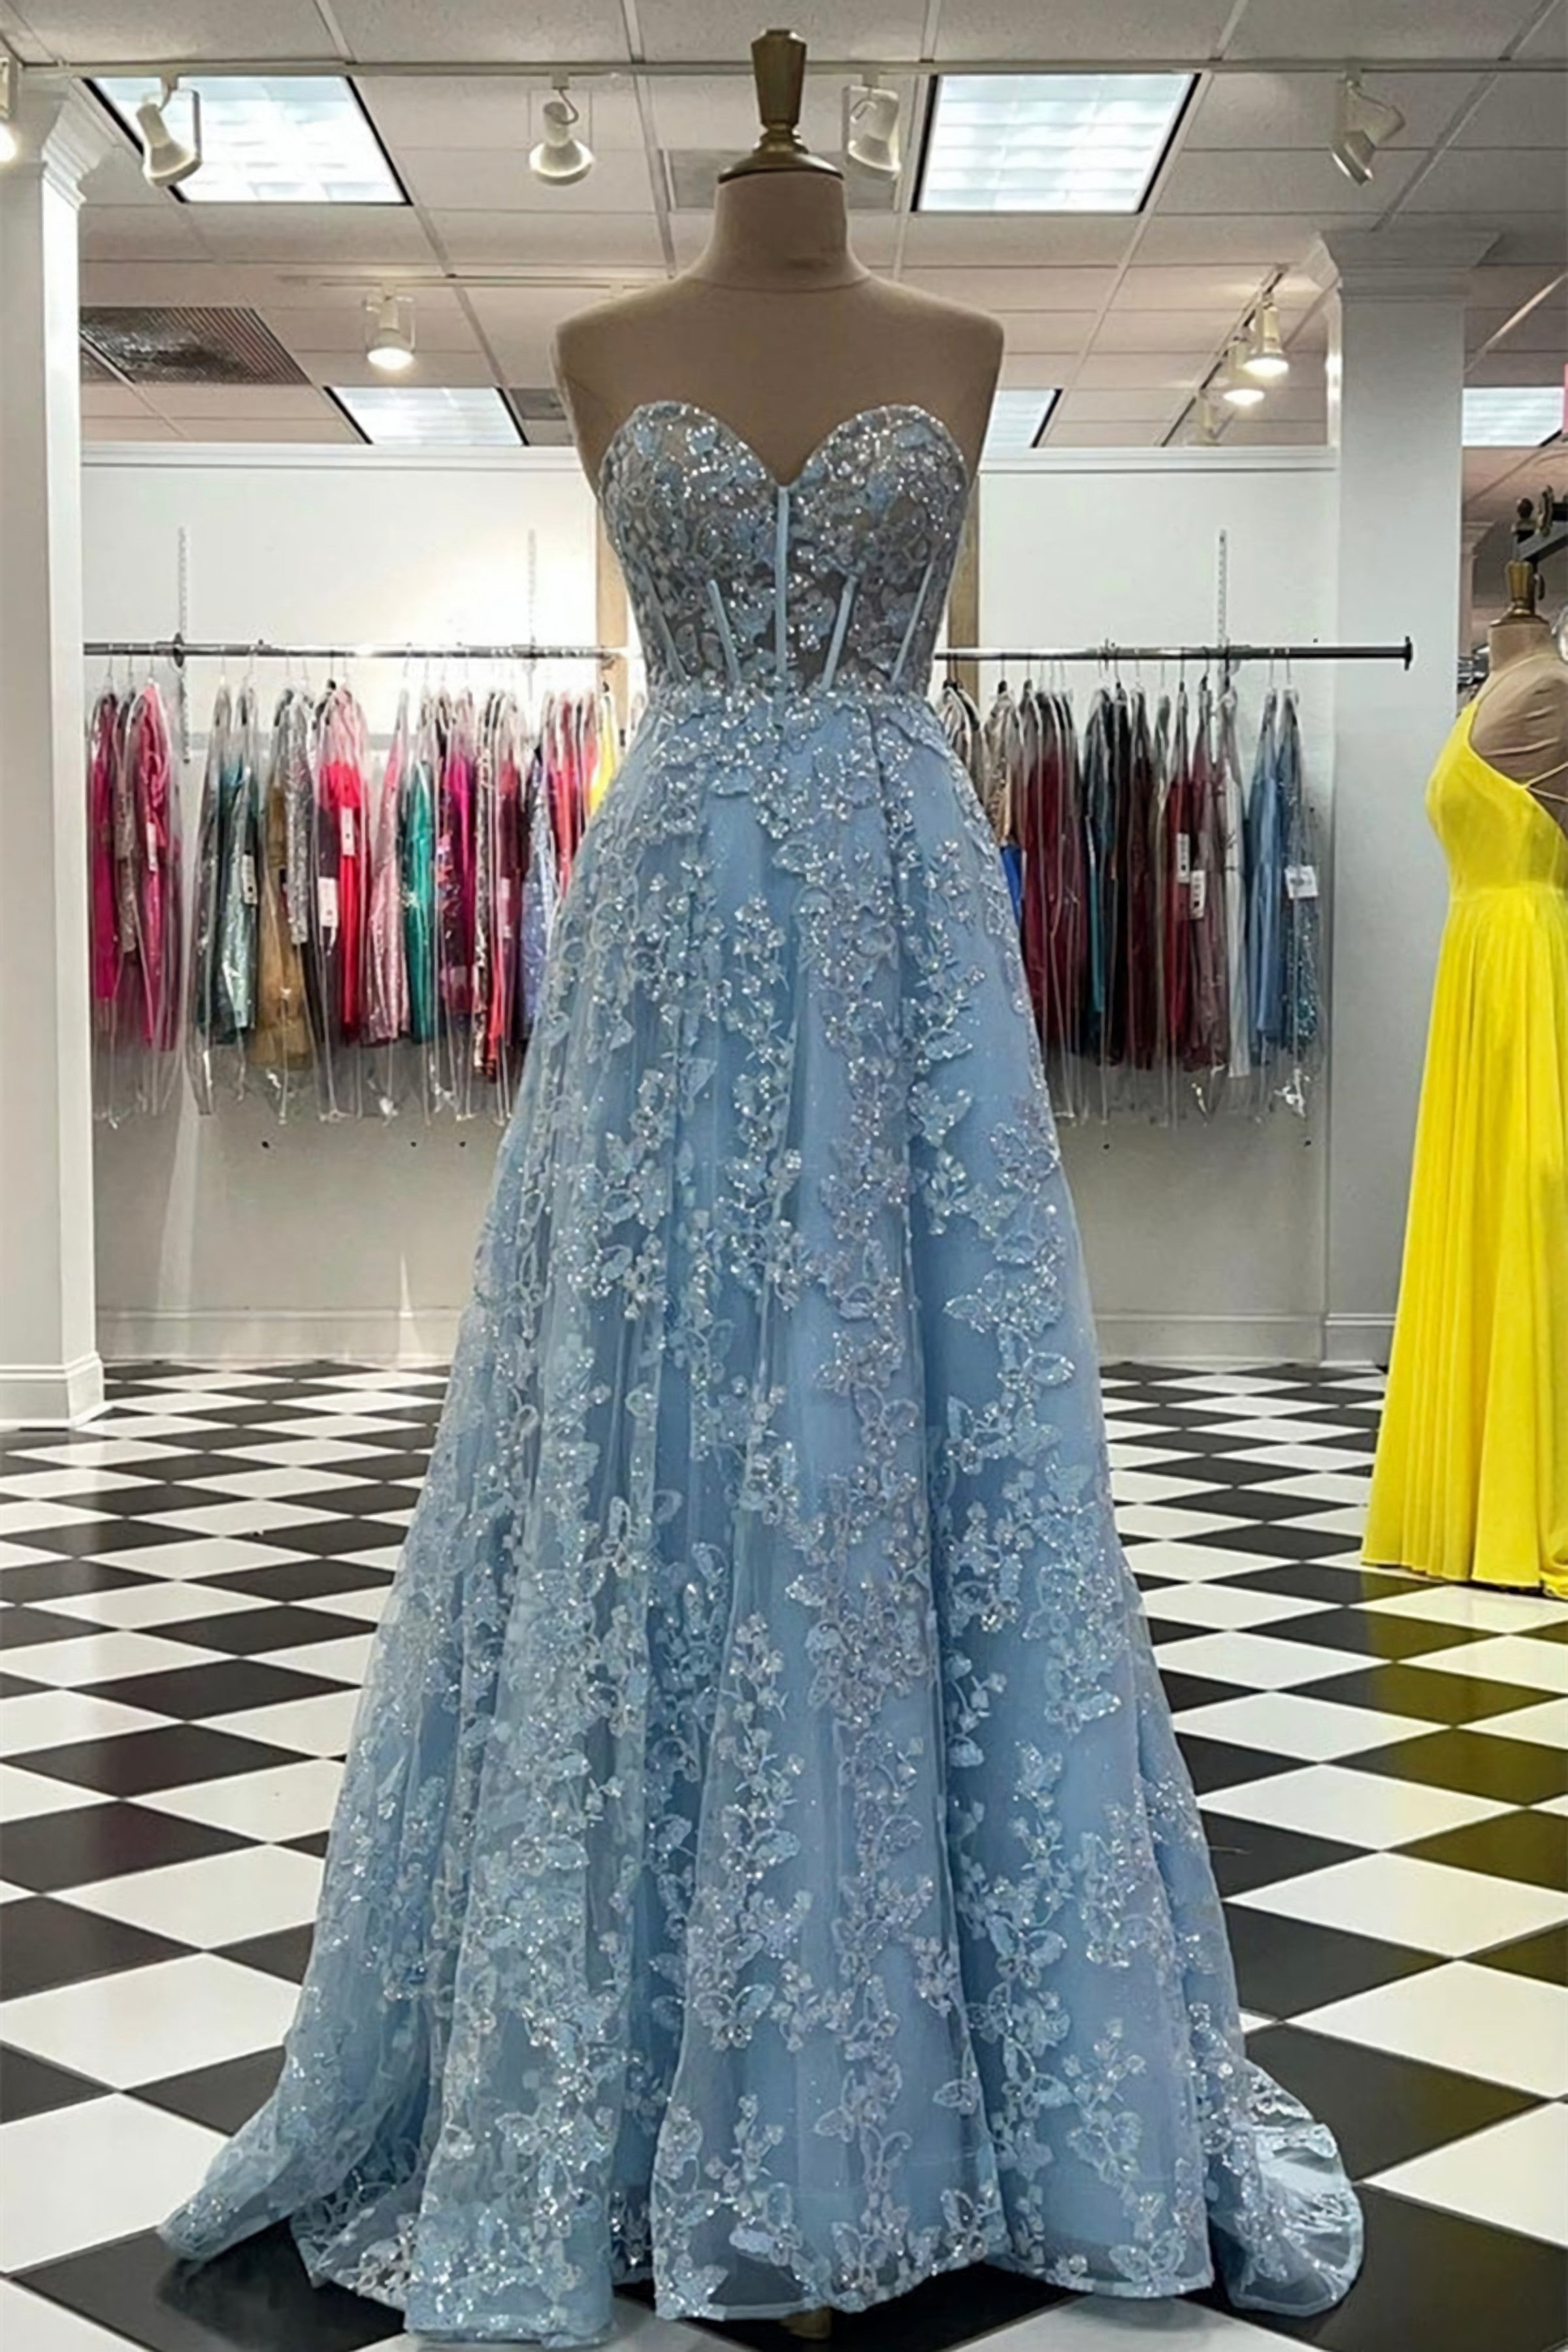 Bridesmaid Dresses Winter, Sweetheart Neck Blue Lace Appliques Long Prom Dress, With Long Sleeves Blue Lace Floral Formal Graduation Evening Dress